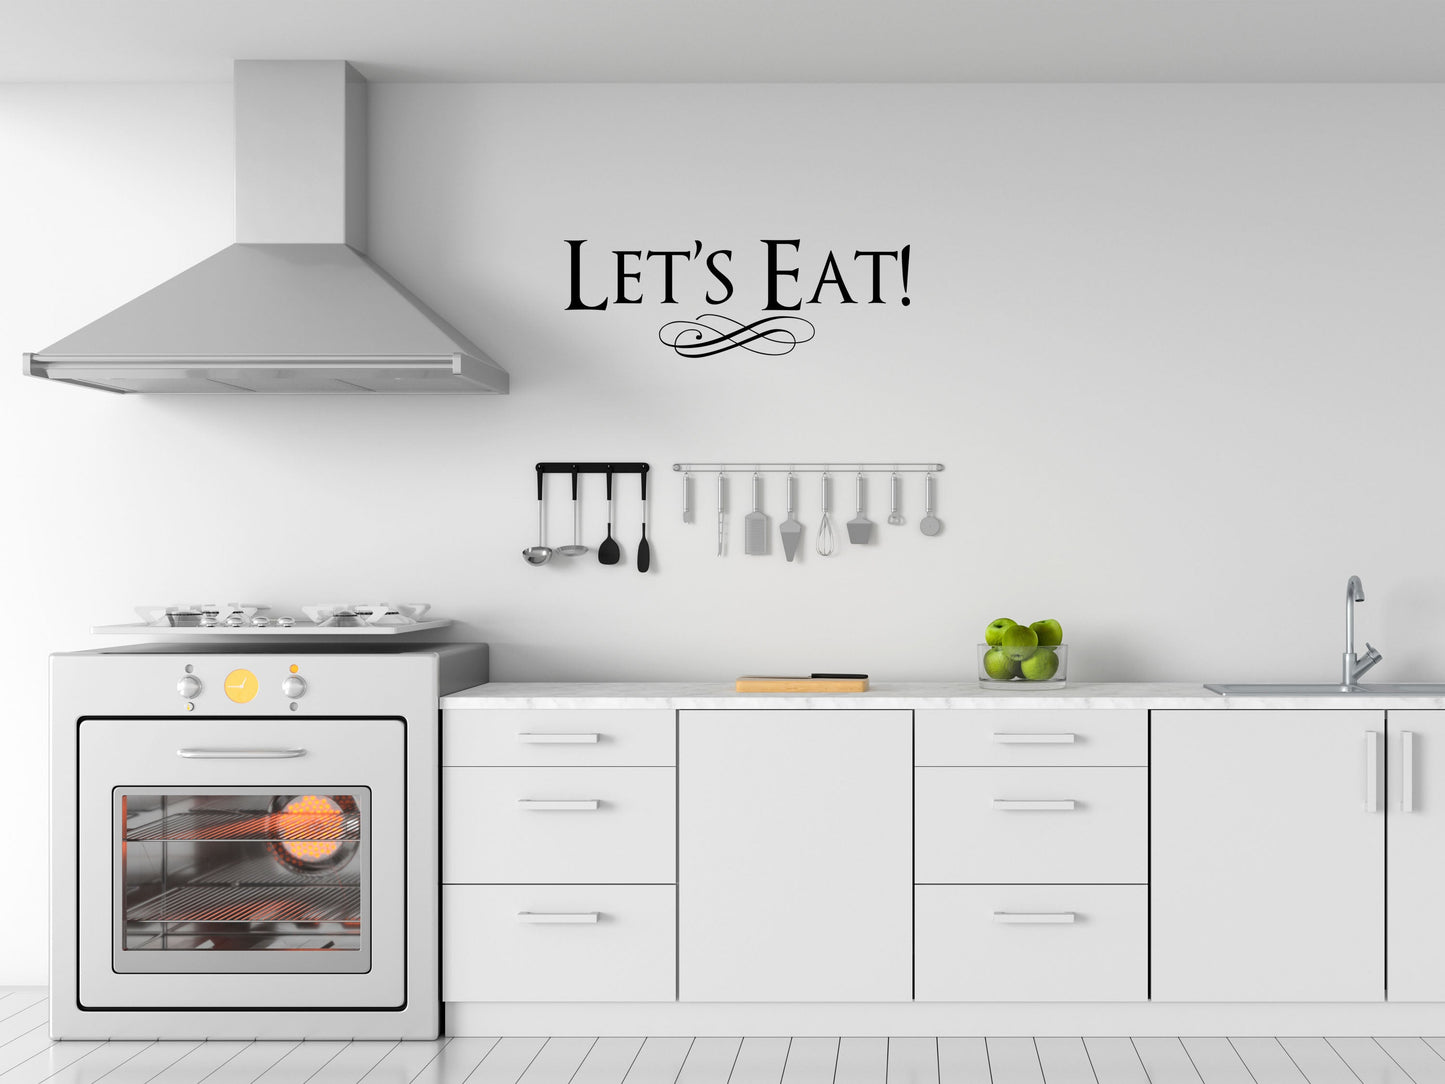 Let's Eat - Inspirational Wall Decals Vinyl Wall Decal Inspirational Wall Signs 